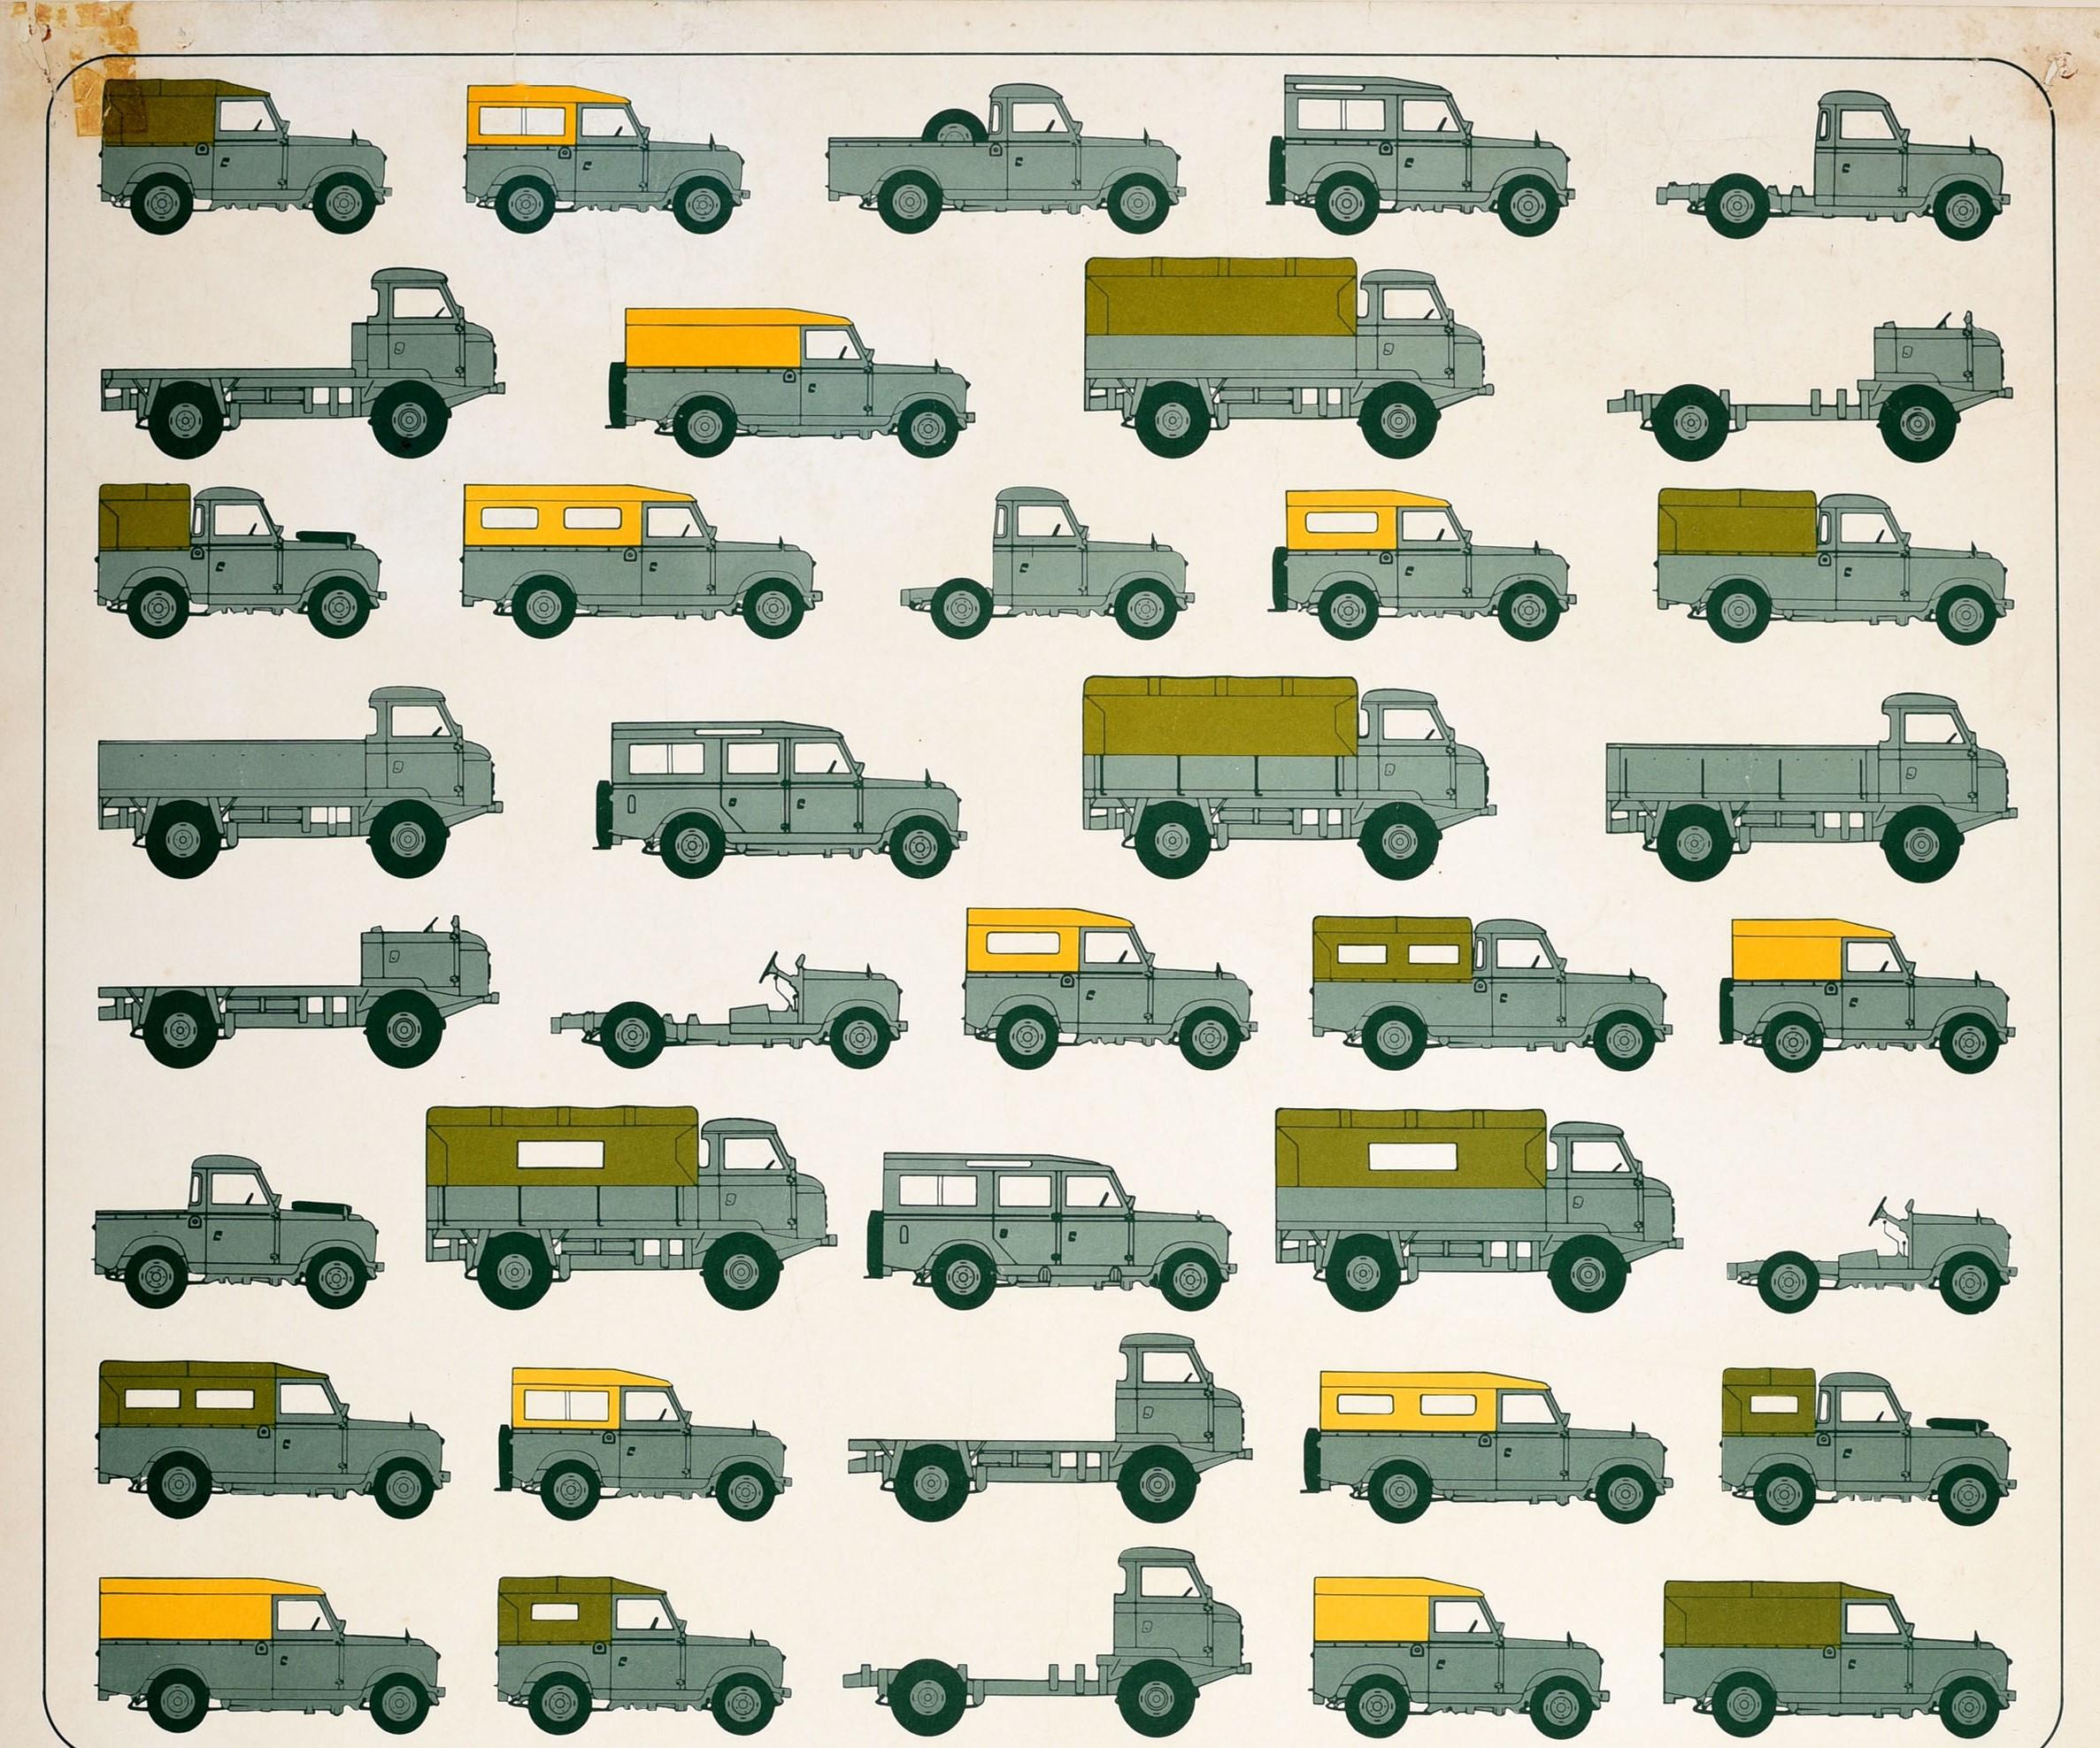 Original vintage car advertising poster for Land Rover: I've Got More Than a Pretty Face - I've Got 38 Body Styles! Great image featuring a range of different models of Land Rover off-road jeep and truck vehicles inside a big speech bubble with a